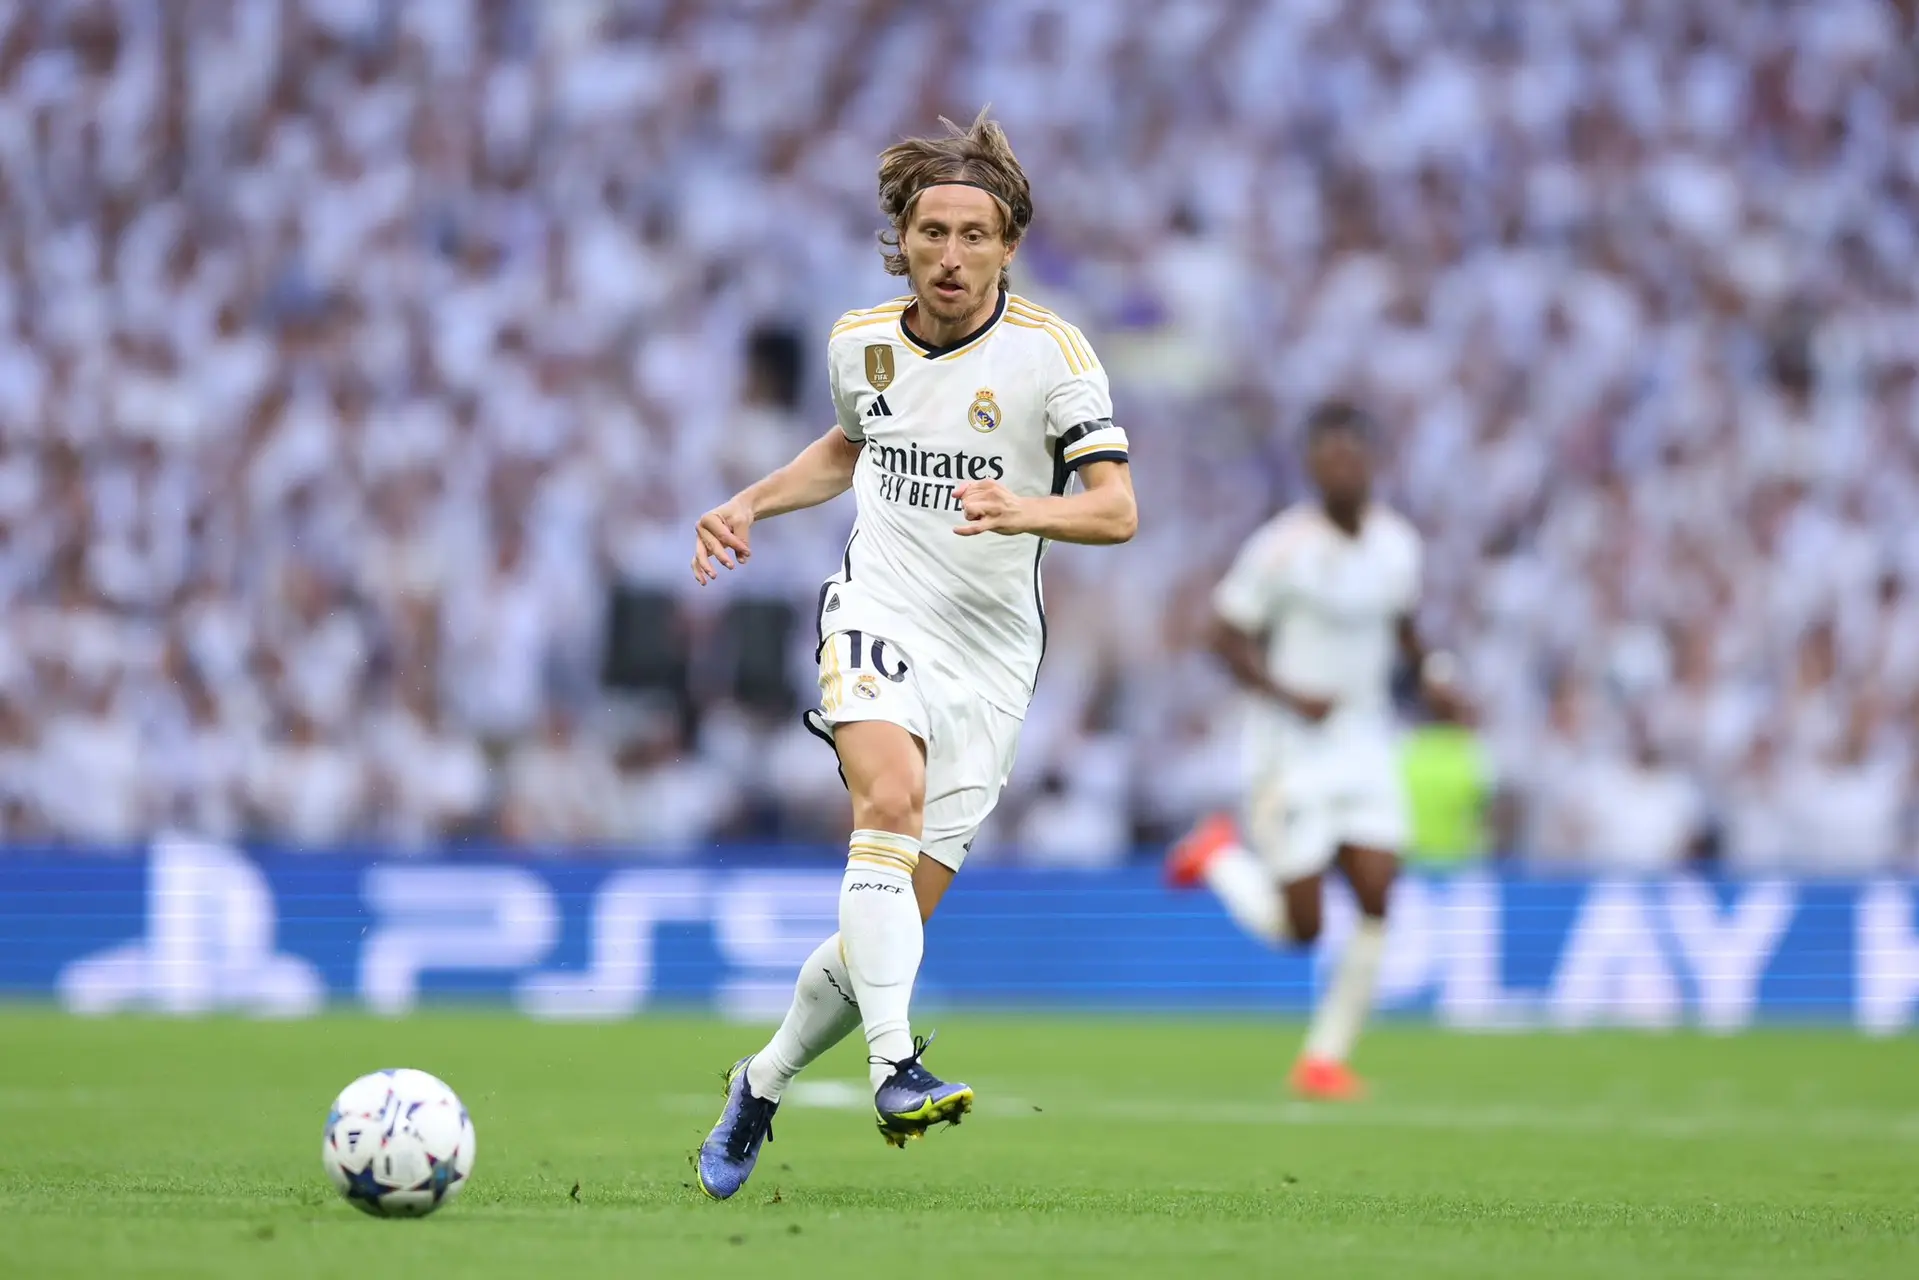 ⚪️🇭🇷 Fair to mention how Luka Modrić entered in the most difficult moment for Real Madrid during el Clásico… and then the game changed.